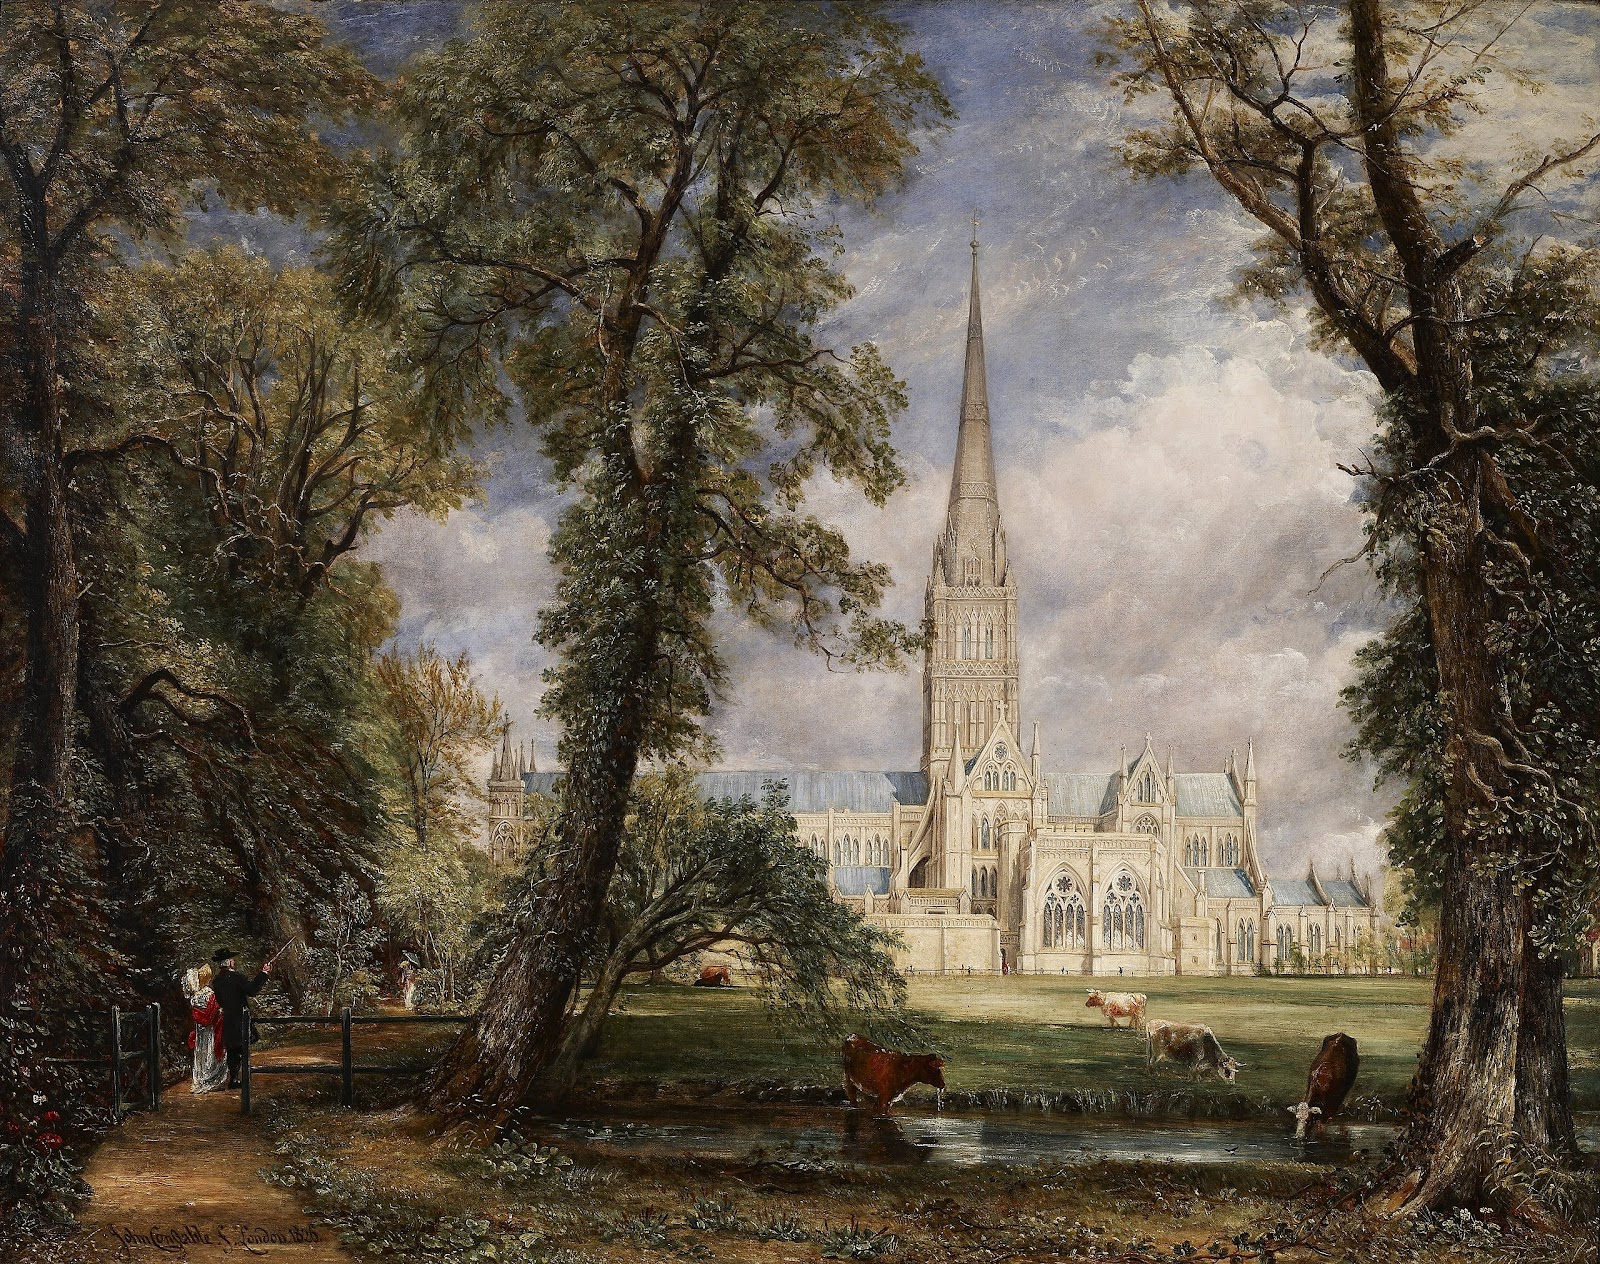 File:John Constable - Salisbury Cathedral from the Bishop's Garden - Google  Art Project.jpg - Wikimedia Commons